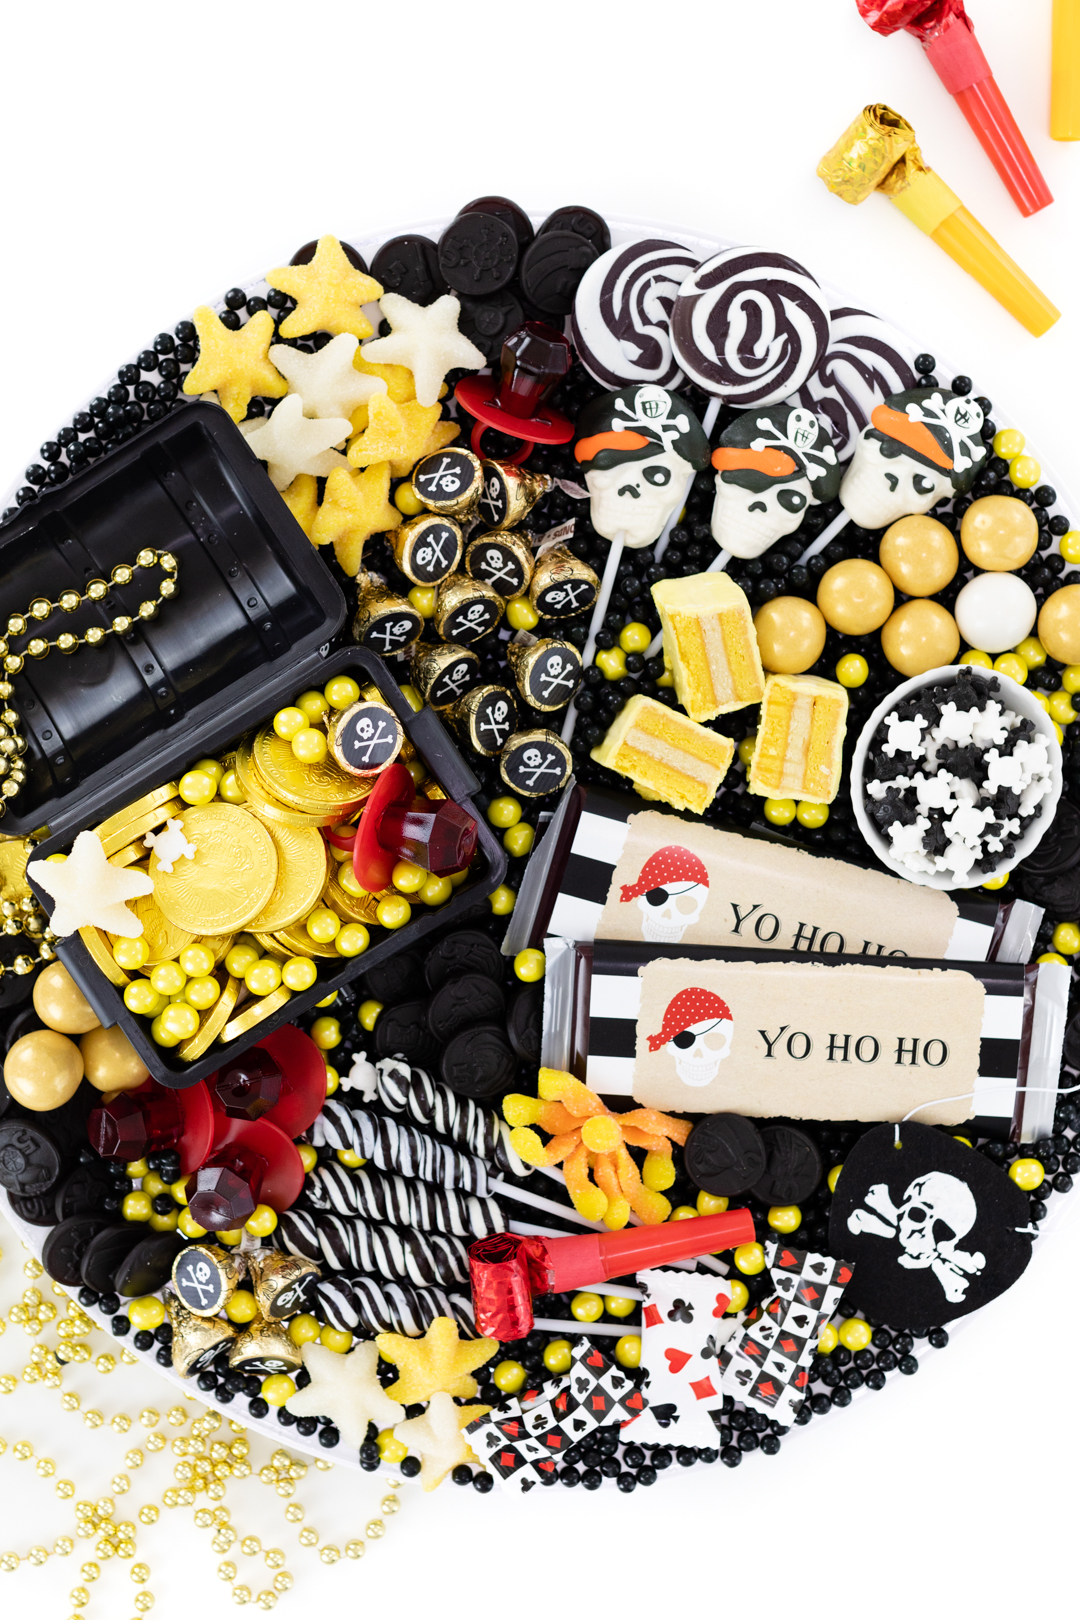 pirate party dessert idea with starfish gummy candy, skull candy, black licorice pirate coins